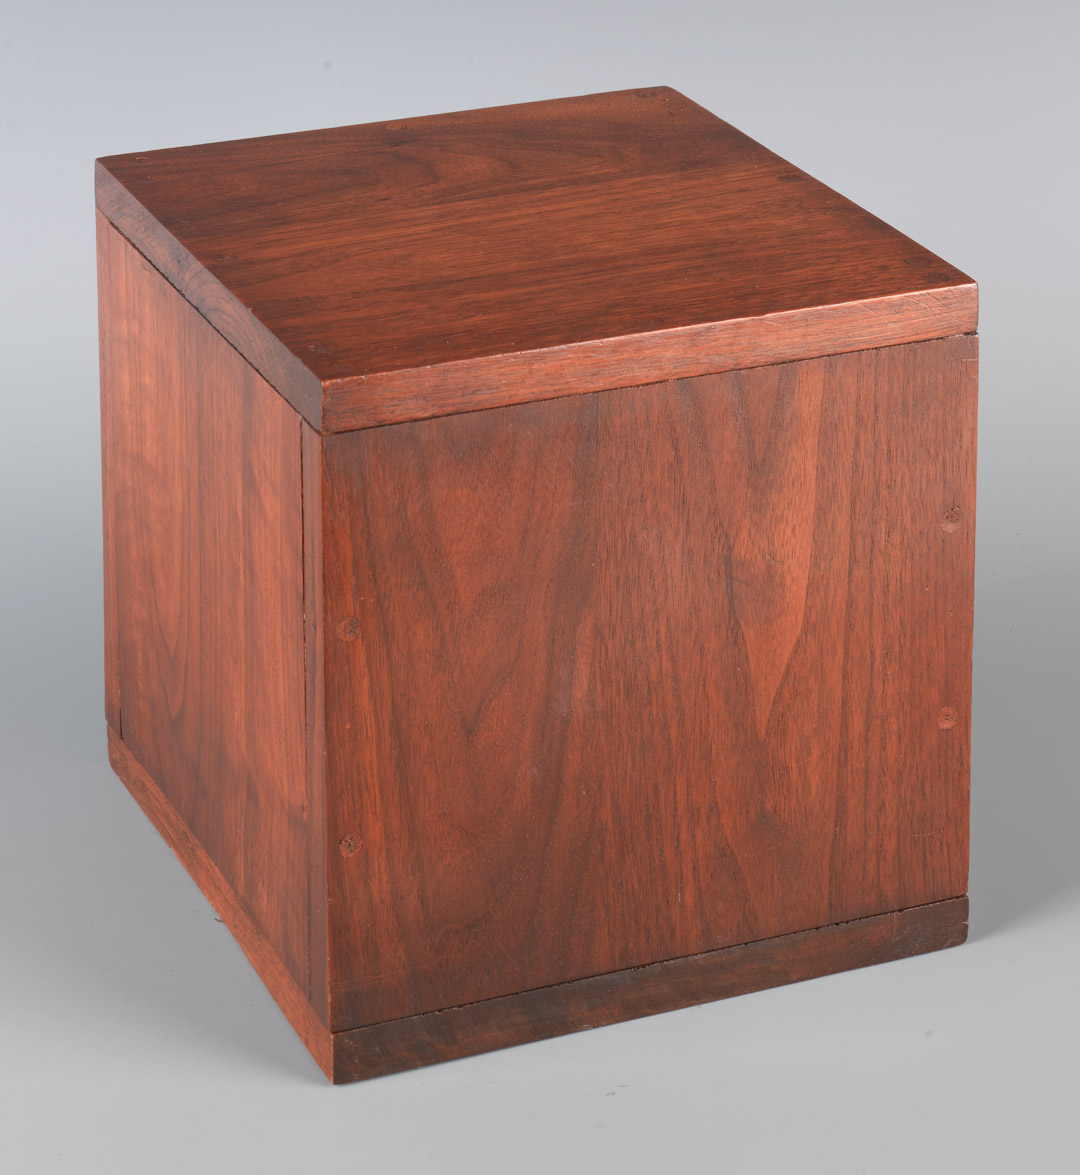 Box with the Sound of Its Own Making, 1961, Robert Morris, Wood, internal speaker, Wooden Cube: 9 3/4 x 9 3/4 x 9 3/4 in. (24.8 x 24.8 x 24.8cm) Overall: 46 x 9 3/4 x 9 3/4in. (116.8 x 24.8 x 24.8cm); TRT 3.5 hours, Gift of the Virginia and Bagley Wright Collection, 82.190, © 2007 Robert Morris / Artists Rights Society (ARS), New York.